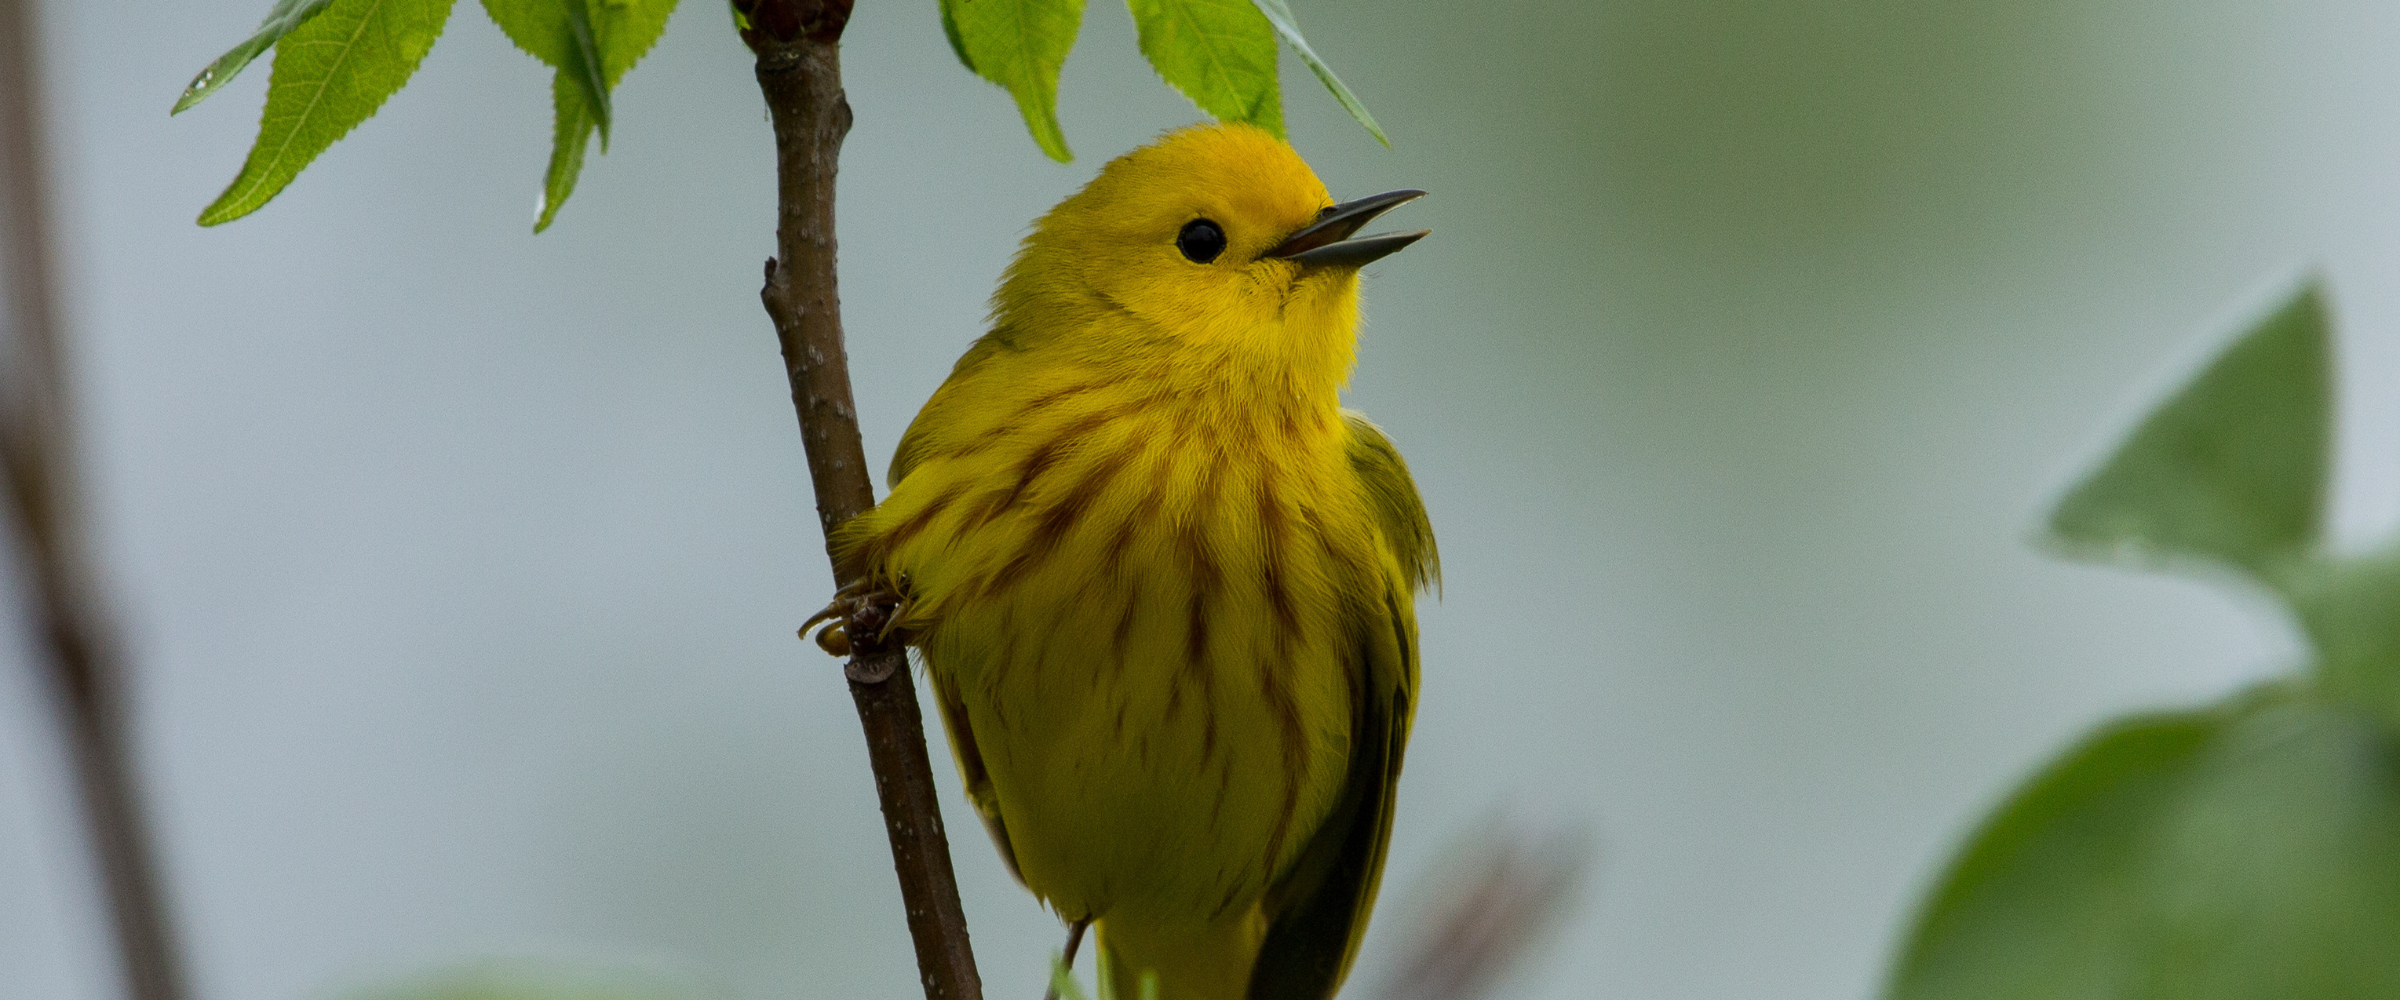 A Yellow Warbler clings to the side of a thin branch, beak open.